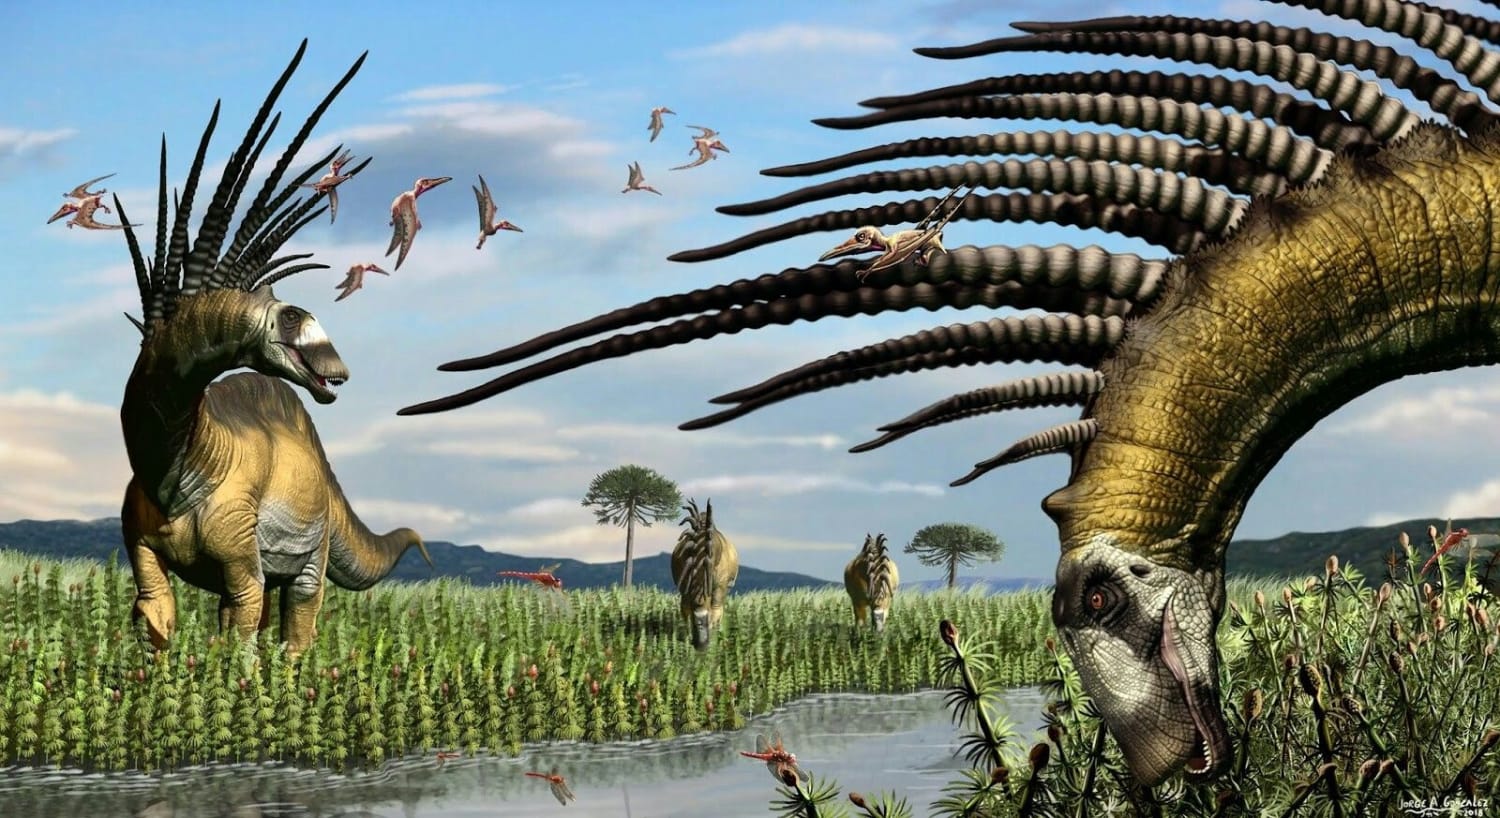 Newly Discovered Spiked Dinosaurs From South America Look Like Creatures From 'No Man's Sky'